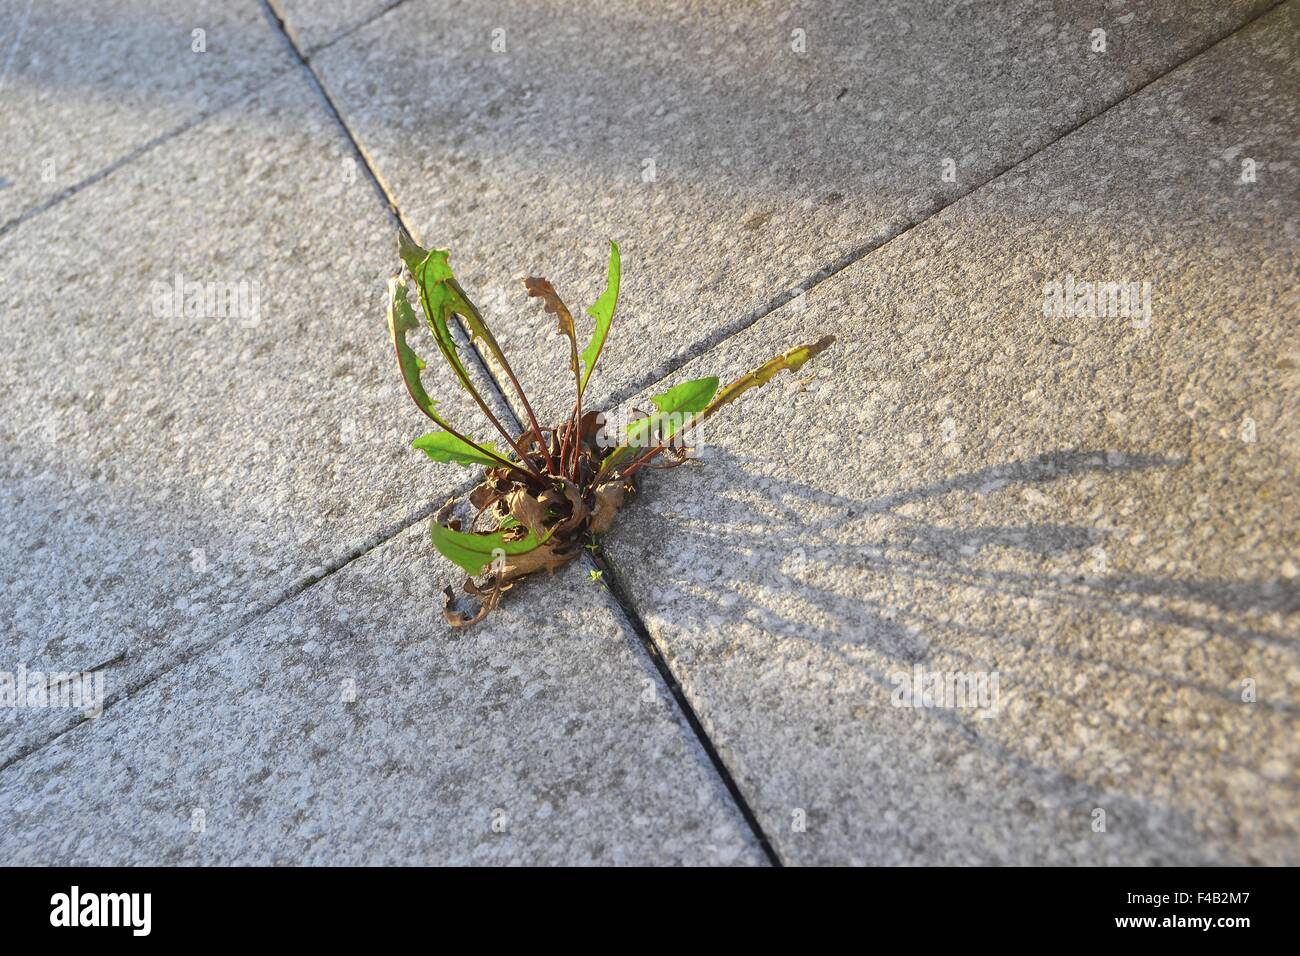 Struggle for survival of a plant Stock Photo